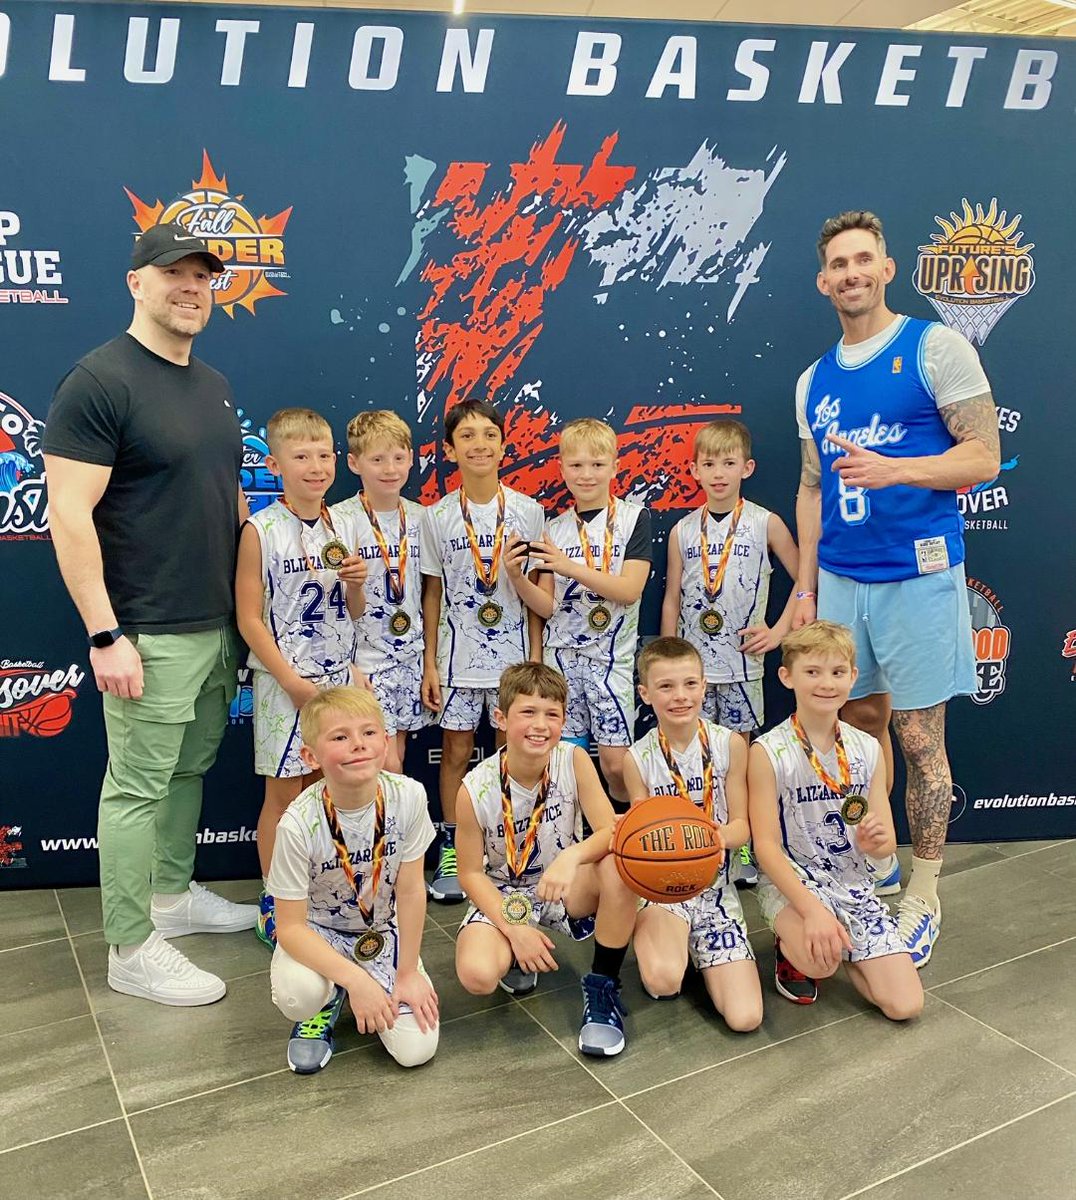 Congratulations to the Wisconsin Blizzard 9U Retzlaff Ice team on winning the Evolution Futures Rising Tournament at the Champion Center. The boys won in dominating fashion going 5 and 0 with a 19 point win in the championship. Great job boys!!! #BLIZZFAM